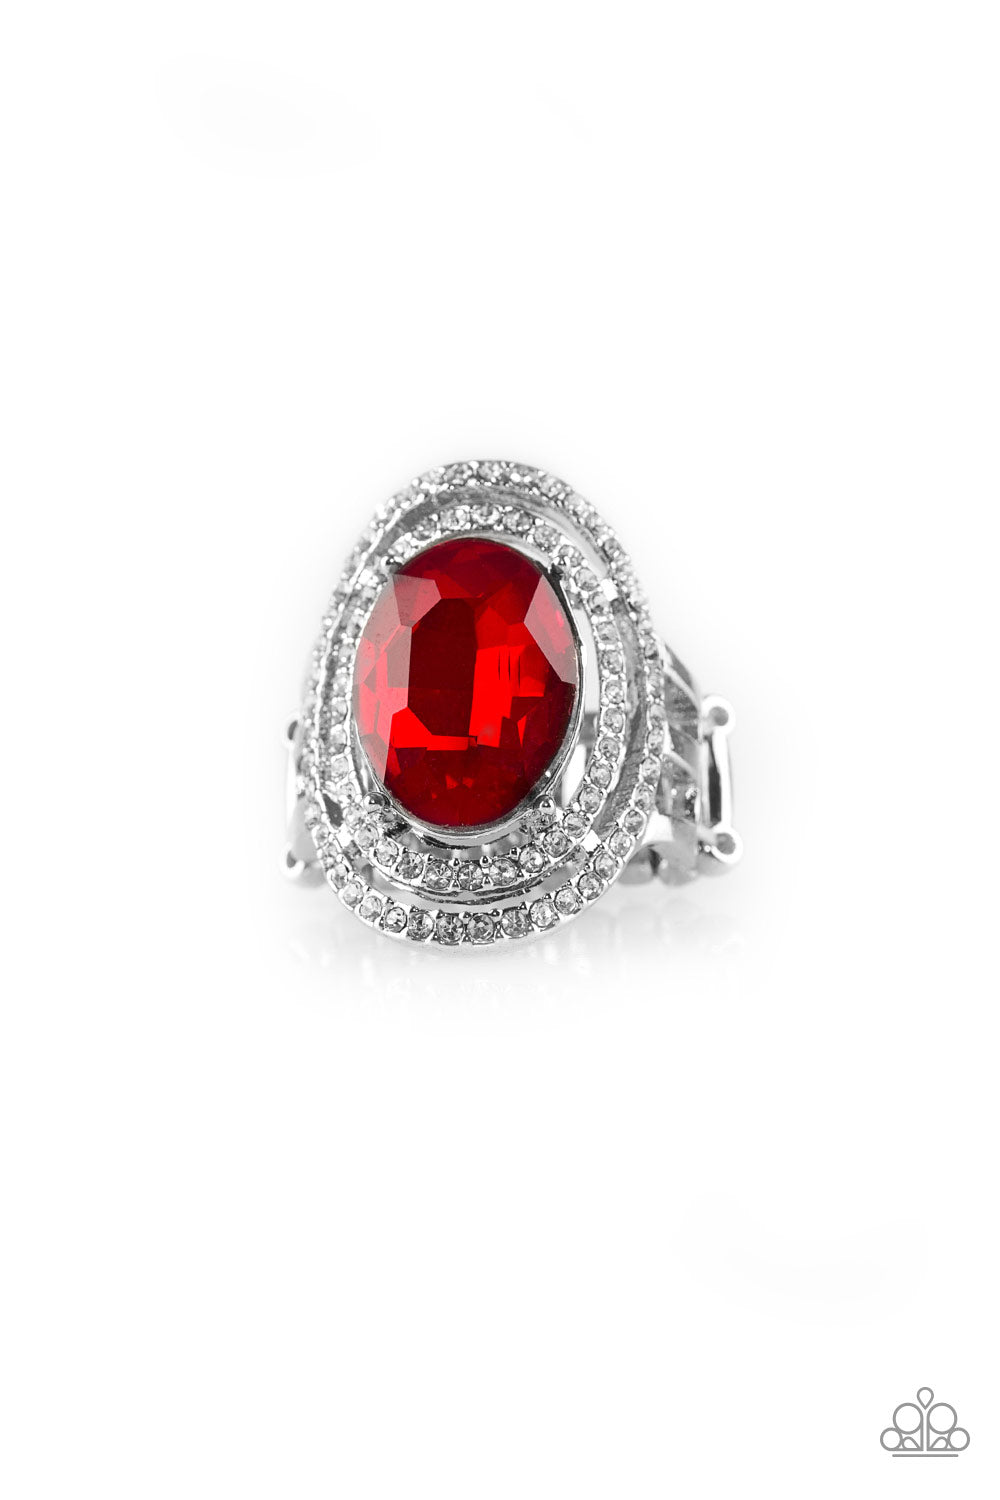 Paparazzi Rings   Making History - Red